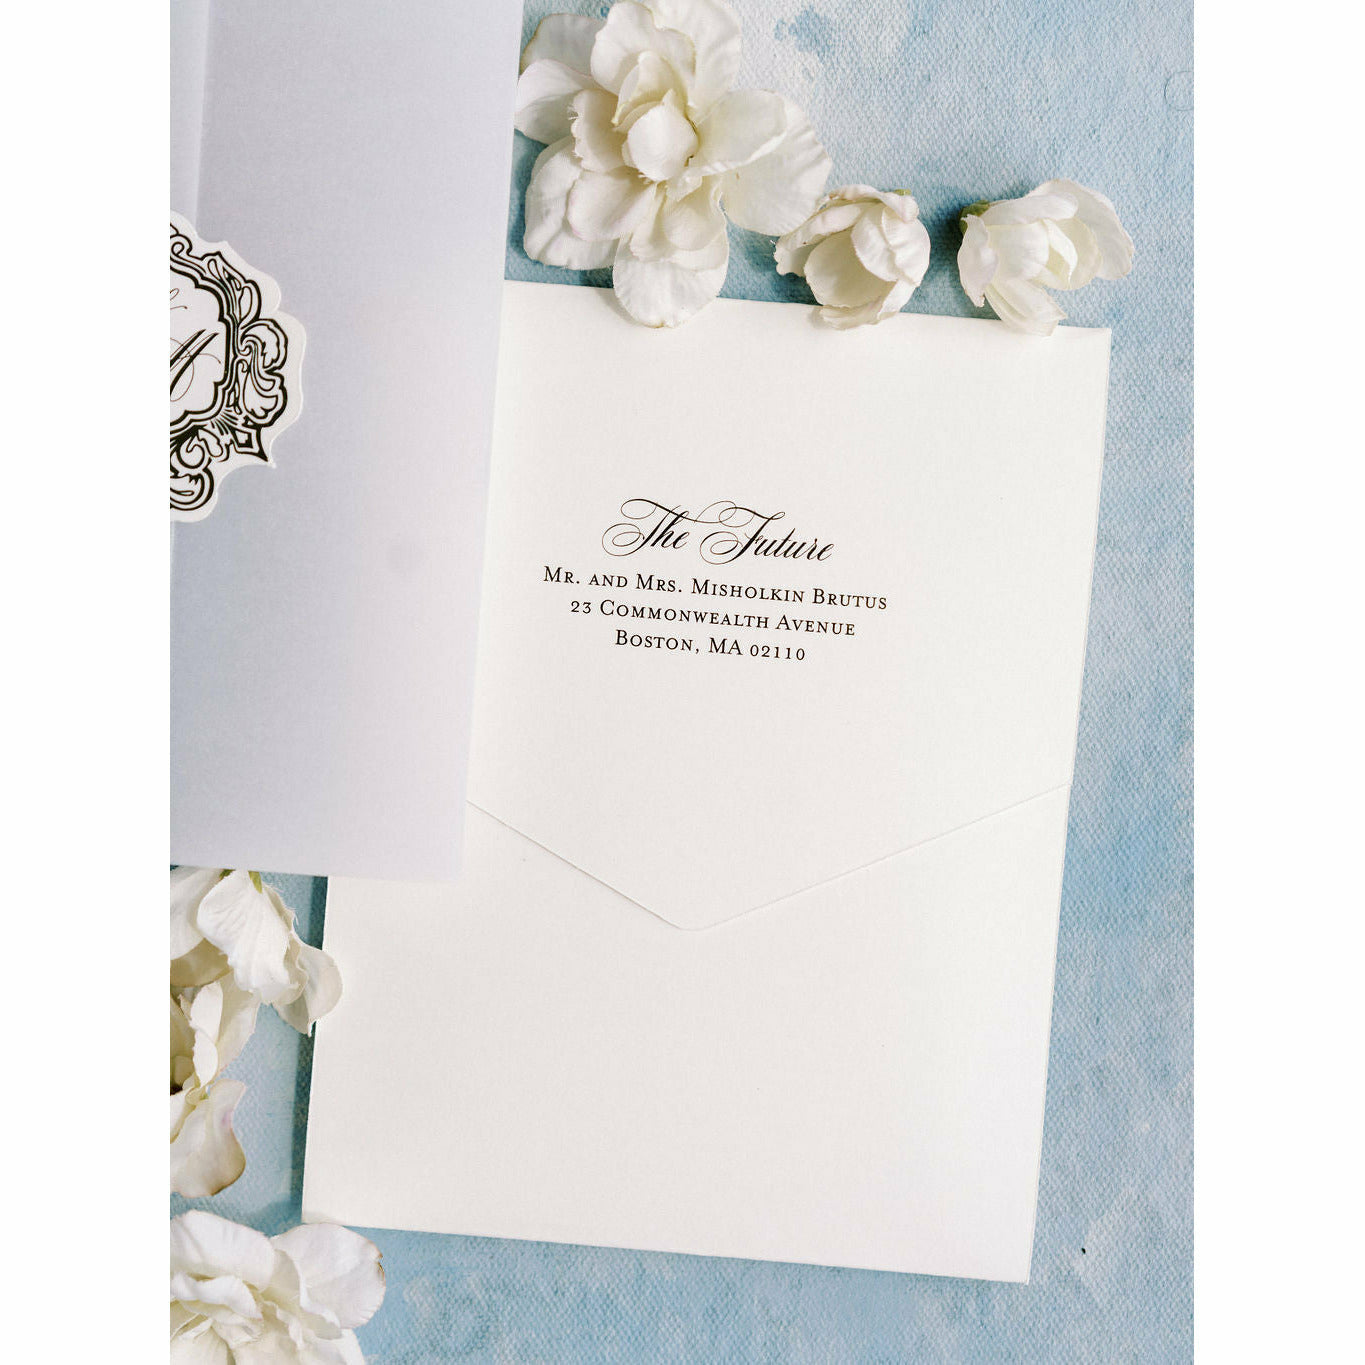 White Script Frosted Acrylic Wedding Invitation – Indy Bee Crafts